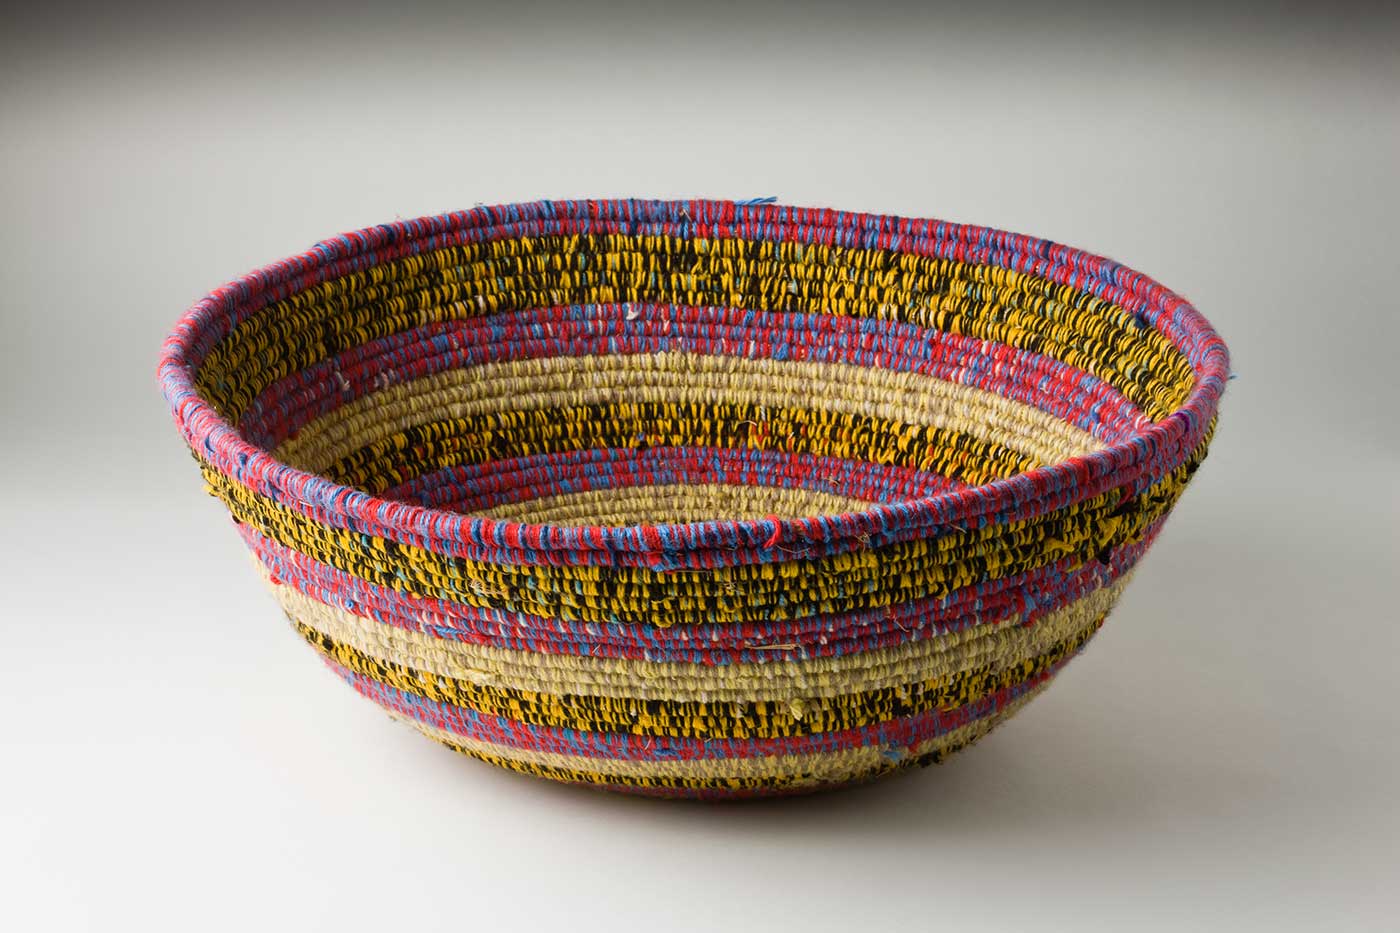 An oval coiled multicoloured yarn and plant fibre basket. The plant fibre in the centre of the basket is covered by purple-yellow yarn, followed by horizontal alternate yarn coverings over the fibre. The yarn colours are green-yellow, tan-yellow, purple-red, yellow-black, green-silver-brown and red-white-brown. The top plant fibre is covered by yellow-black yarn. - click to view larger image